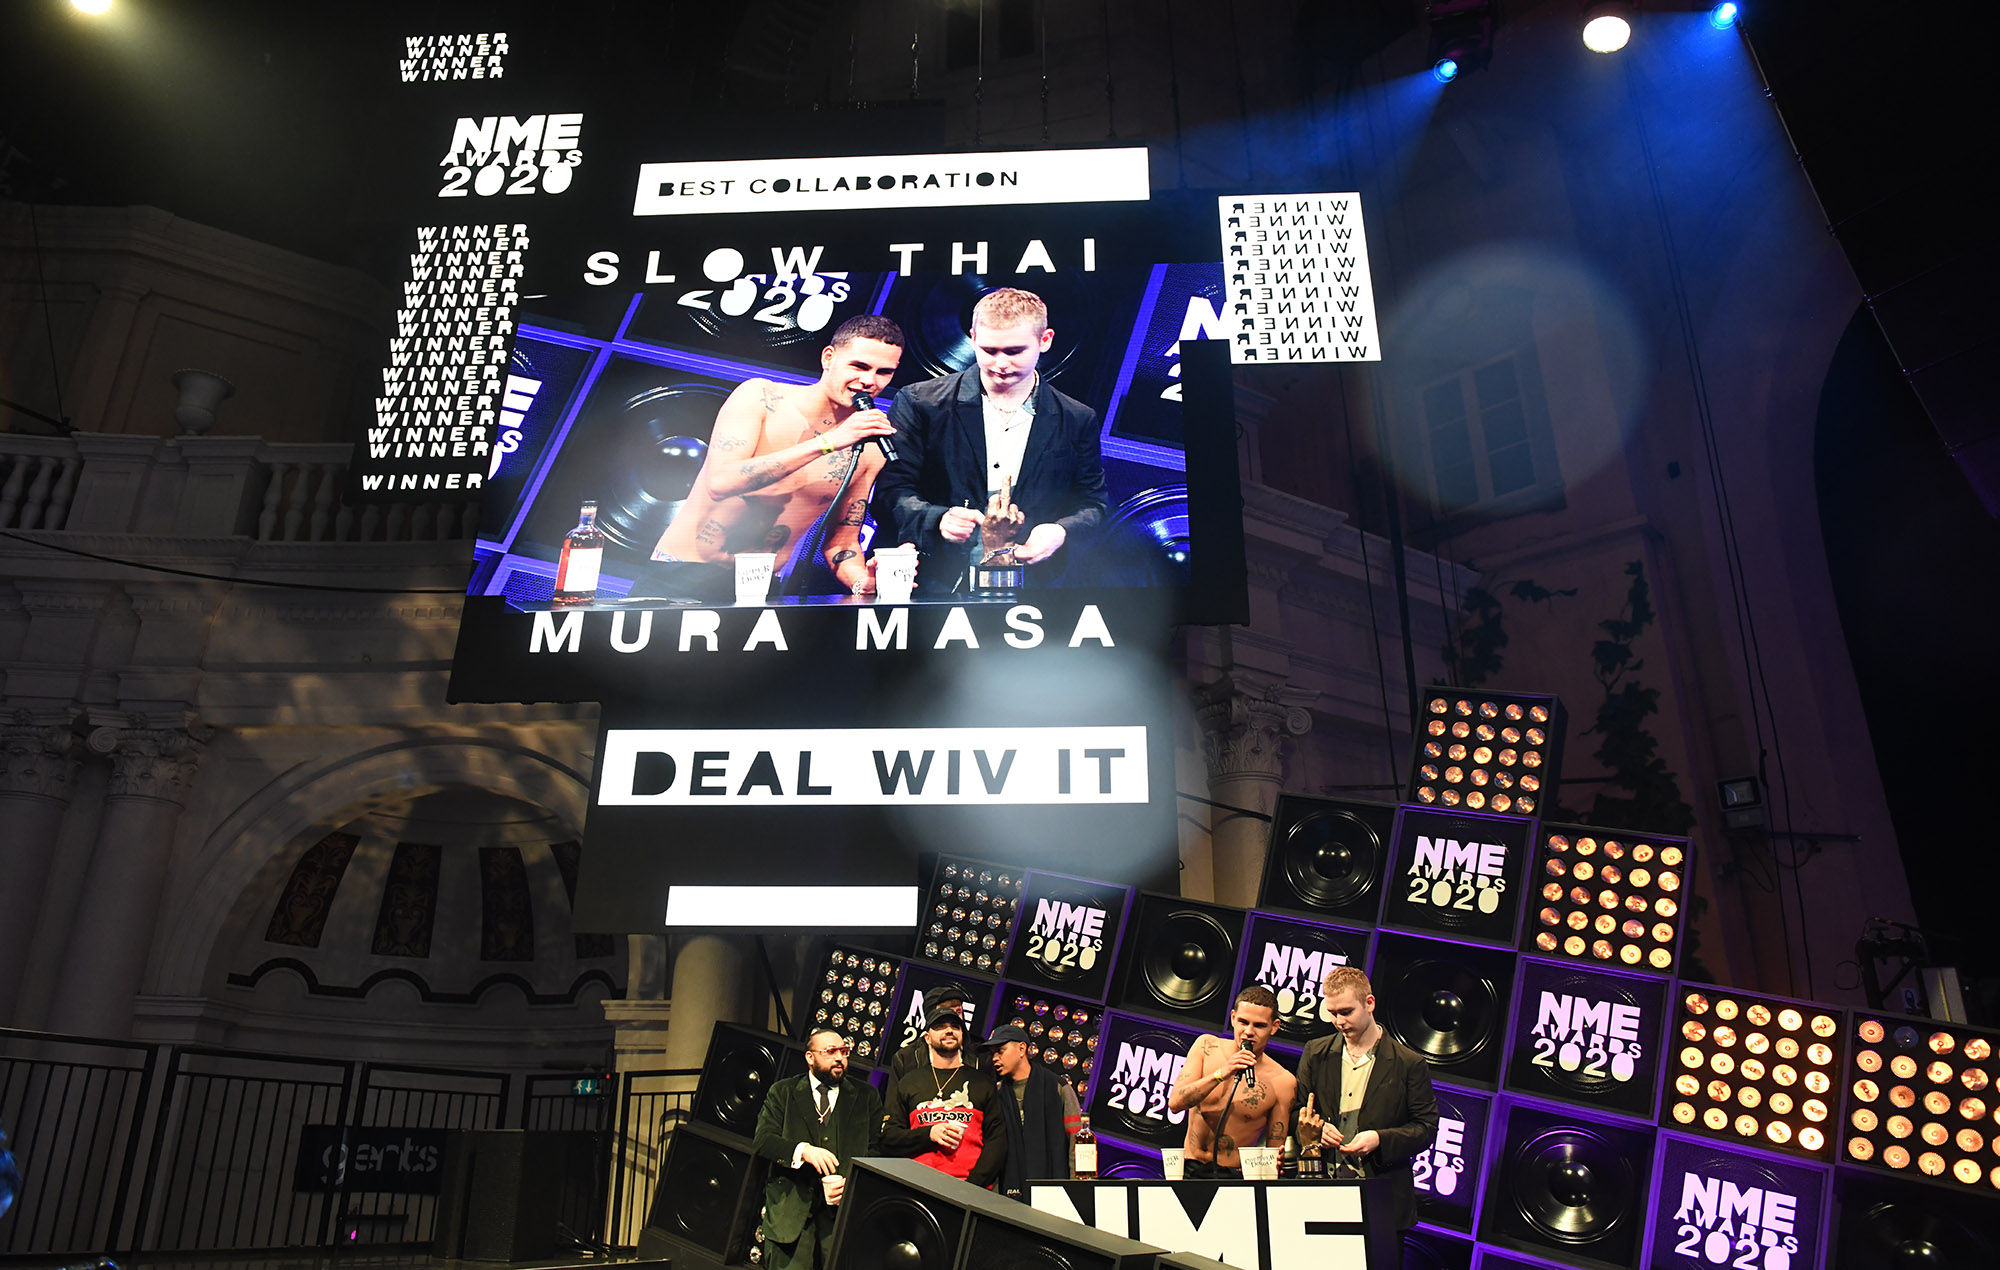 Slowthai & Mura Masa Win Best Collaboration Supported By Brixton Brewery At Nme Awards 2020 photo